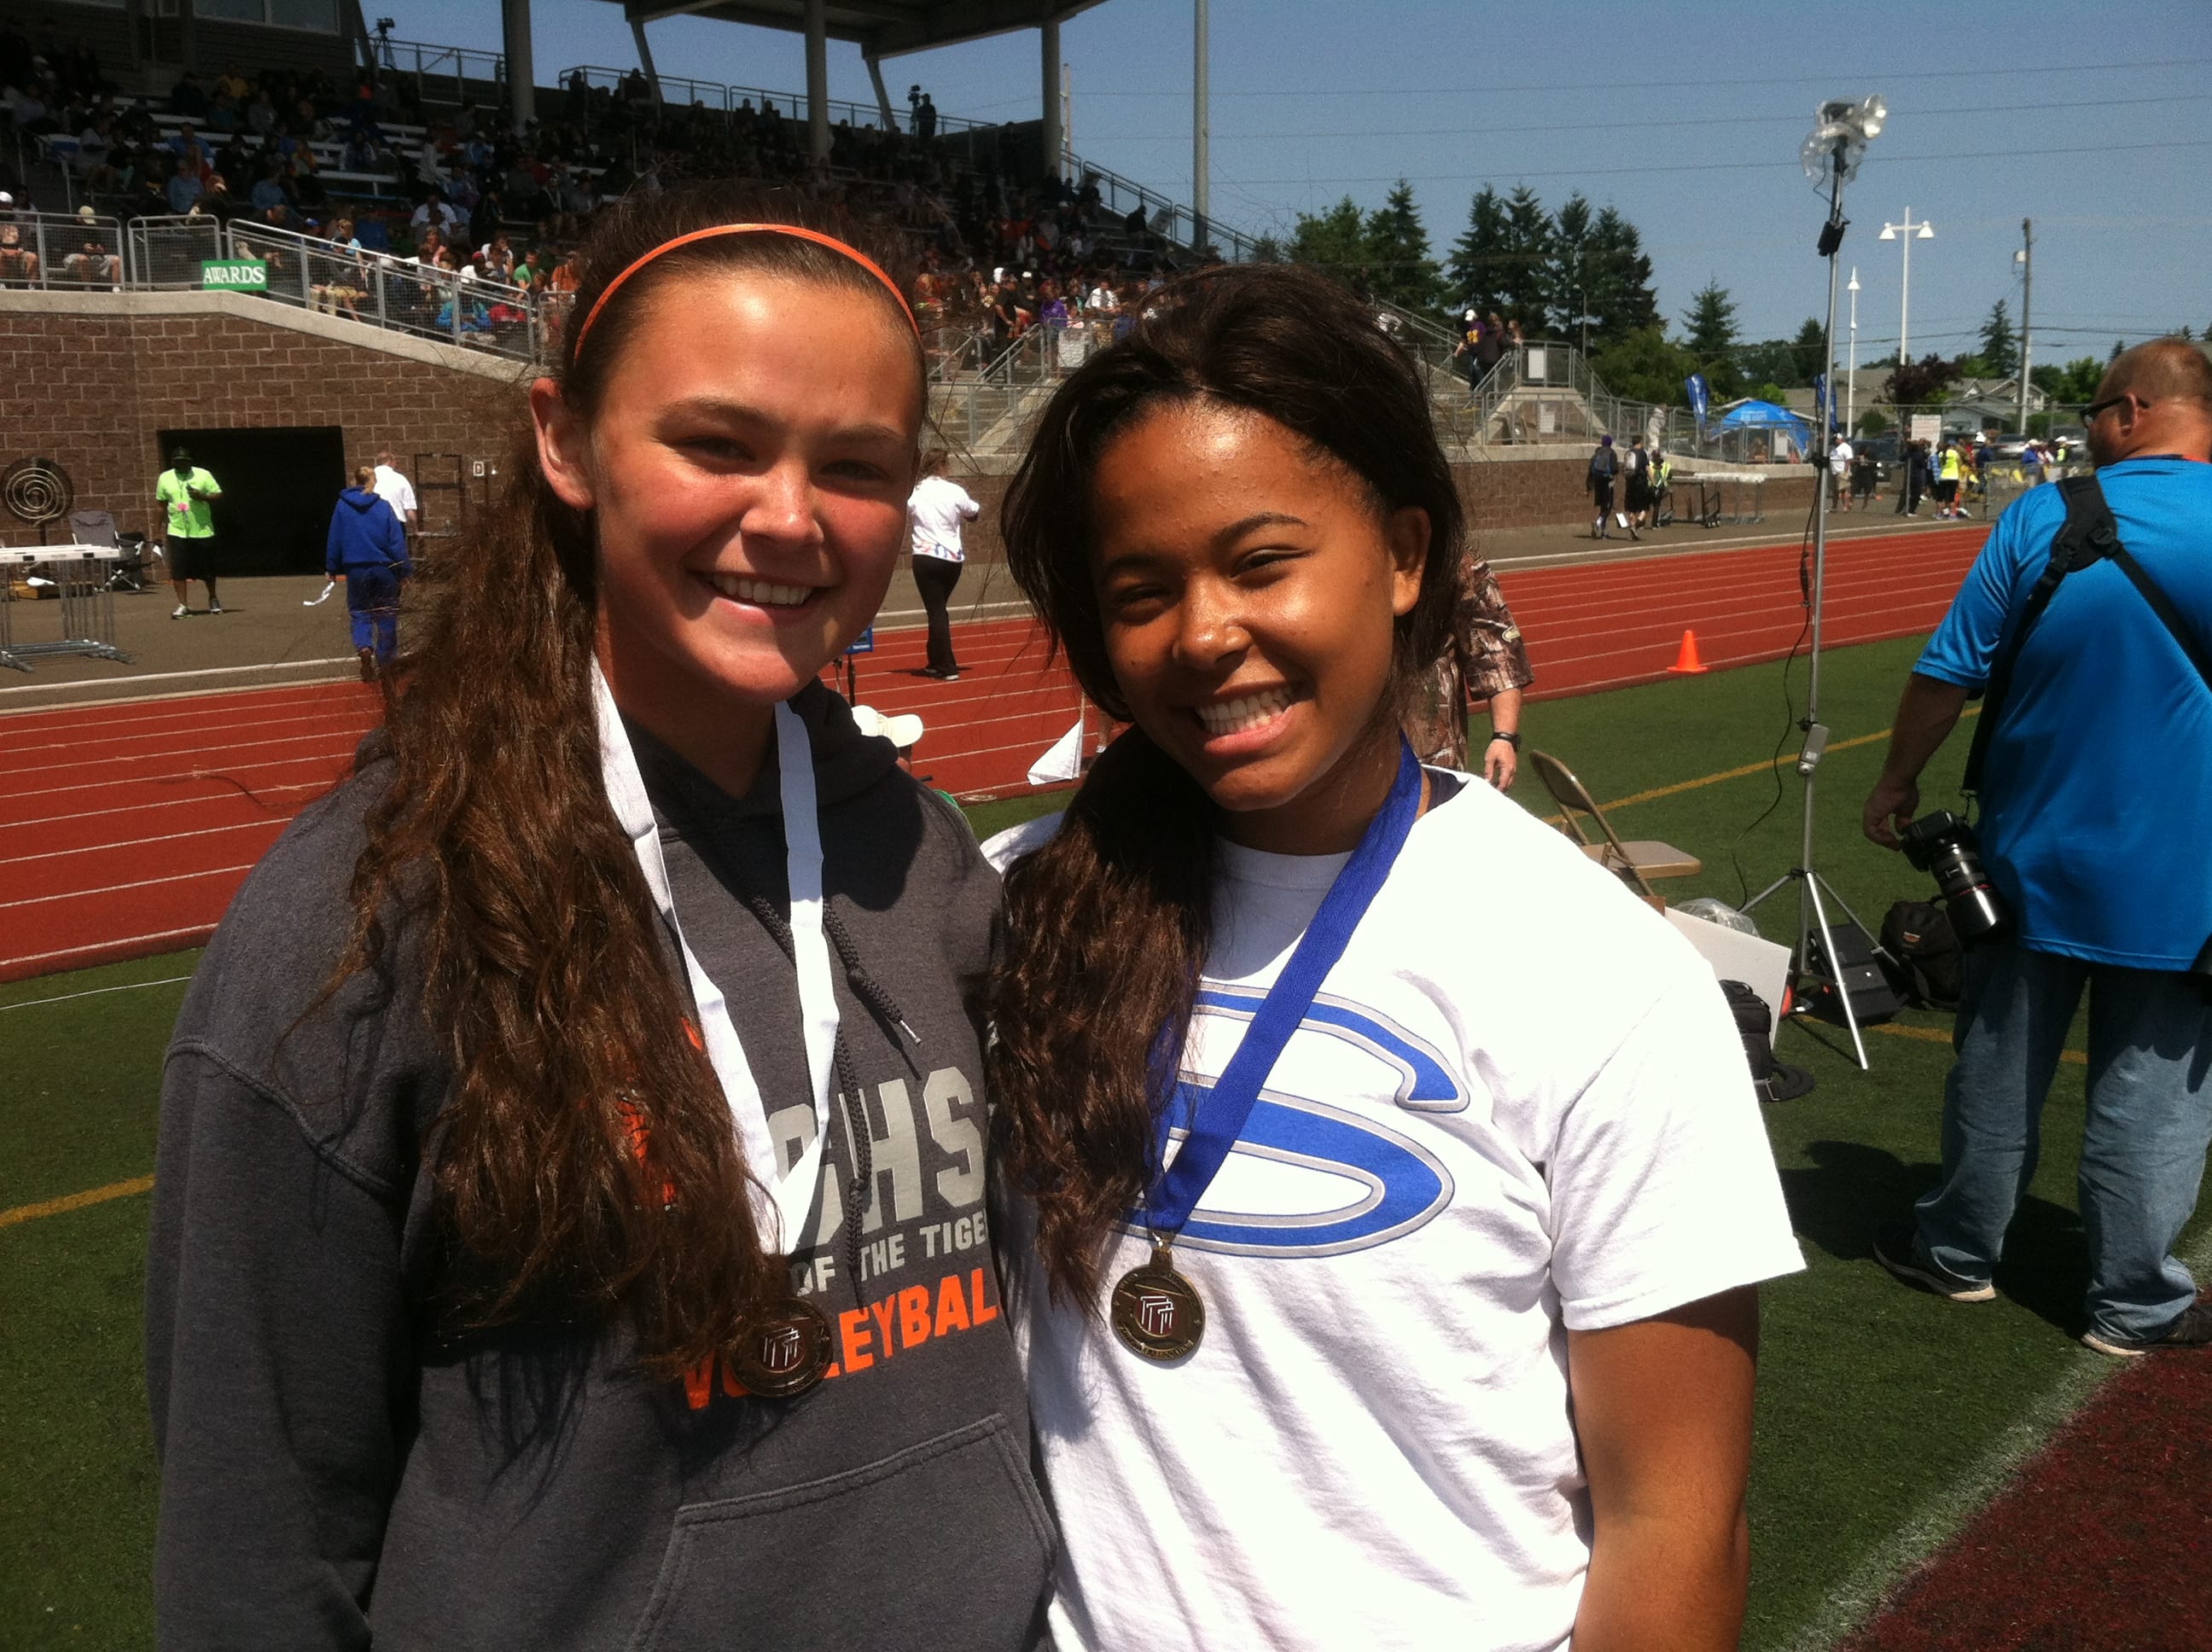 Aubrey Ward-El, right, of Skyview stands with Jossilyn Blackman of Battle Ground after the awards ceremony for the 4A girls shot put at the state track and field meet Friday in Tacoma.